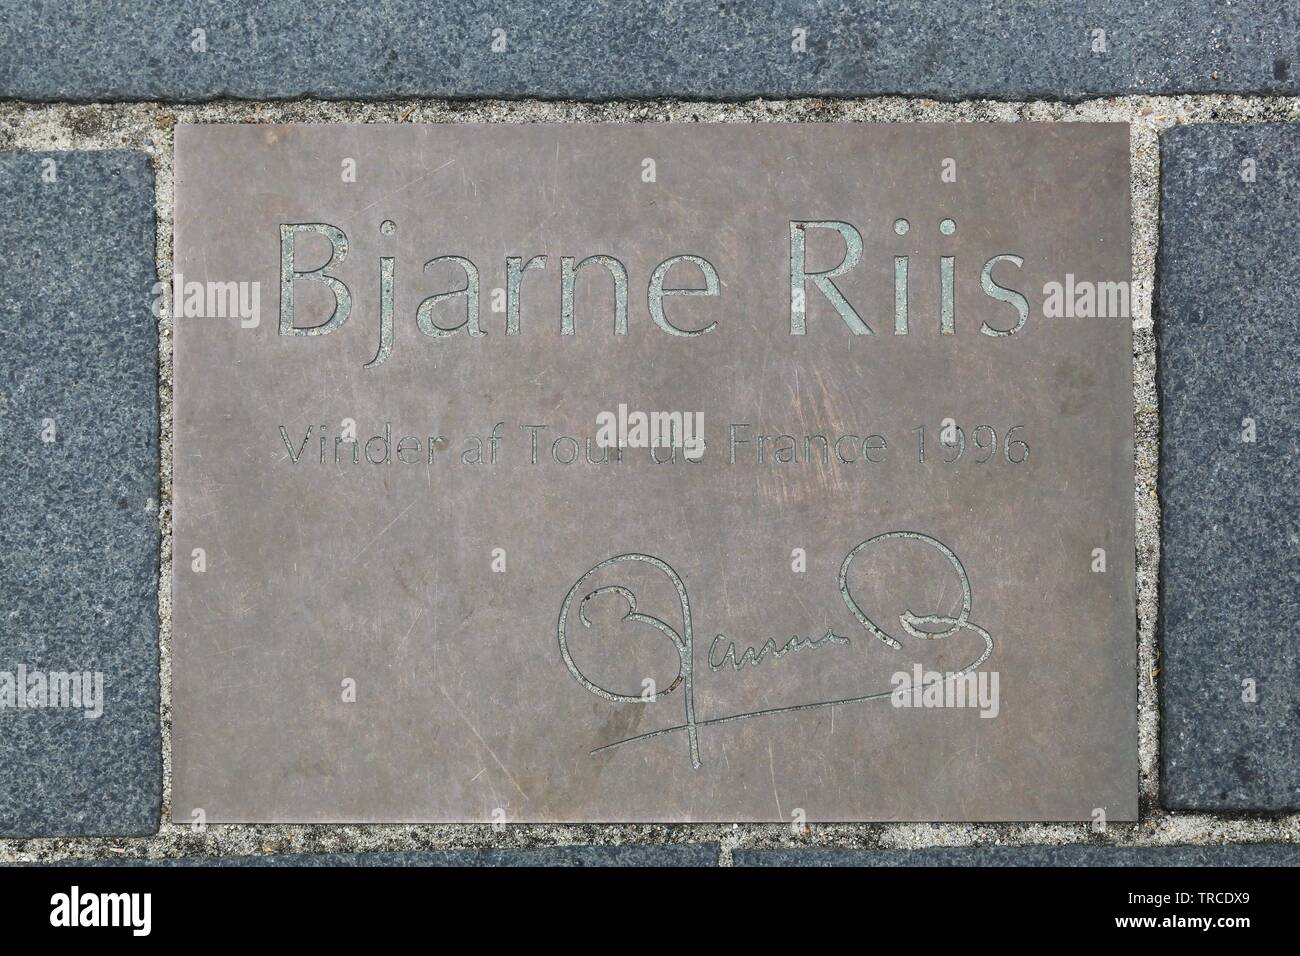 Herning, Denmark - April 9, 2016: Commemorative plaque in city of Herning, Denmark and tribute to Bjarne Riis cyclist, winner of the Tour de France Stock Photo